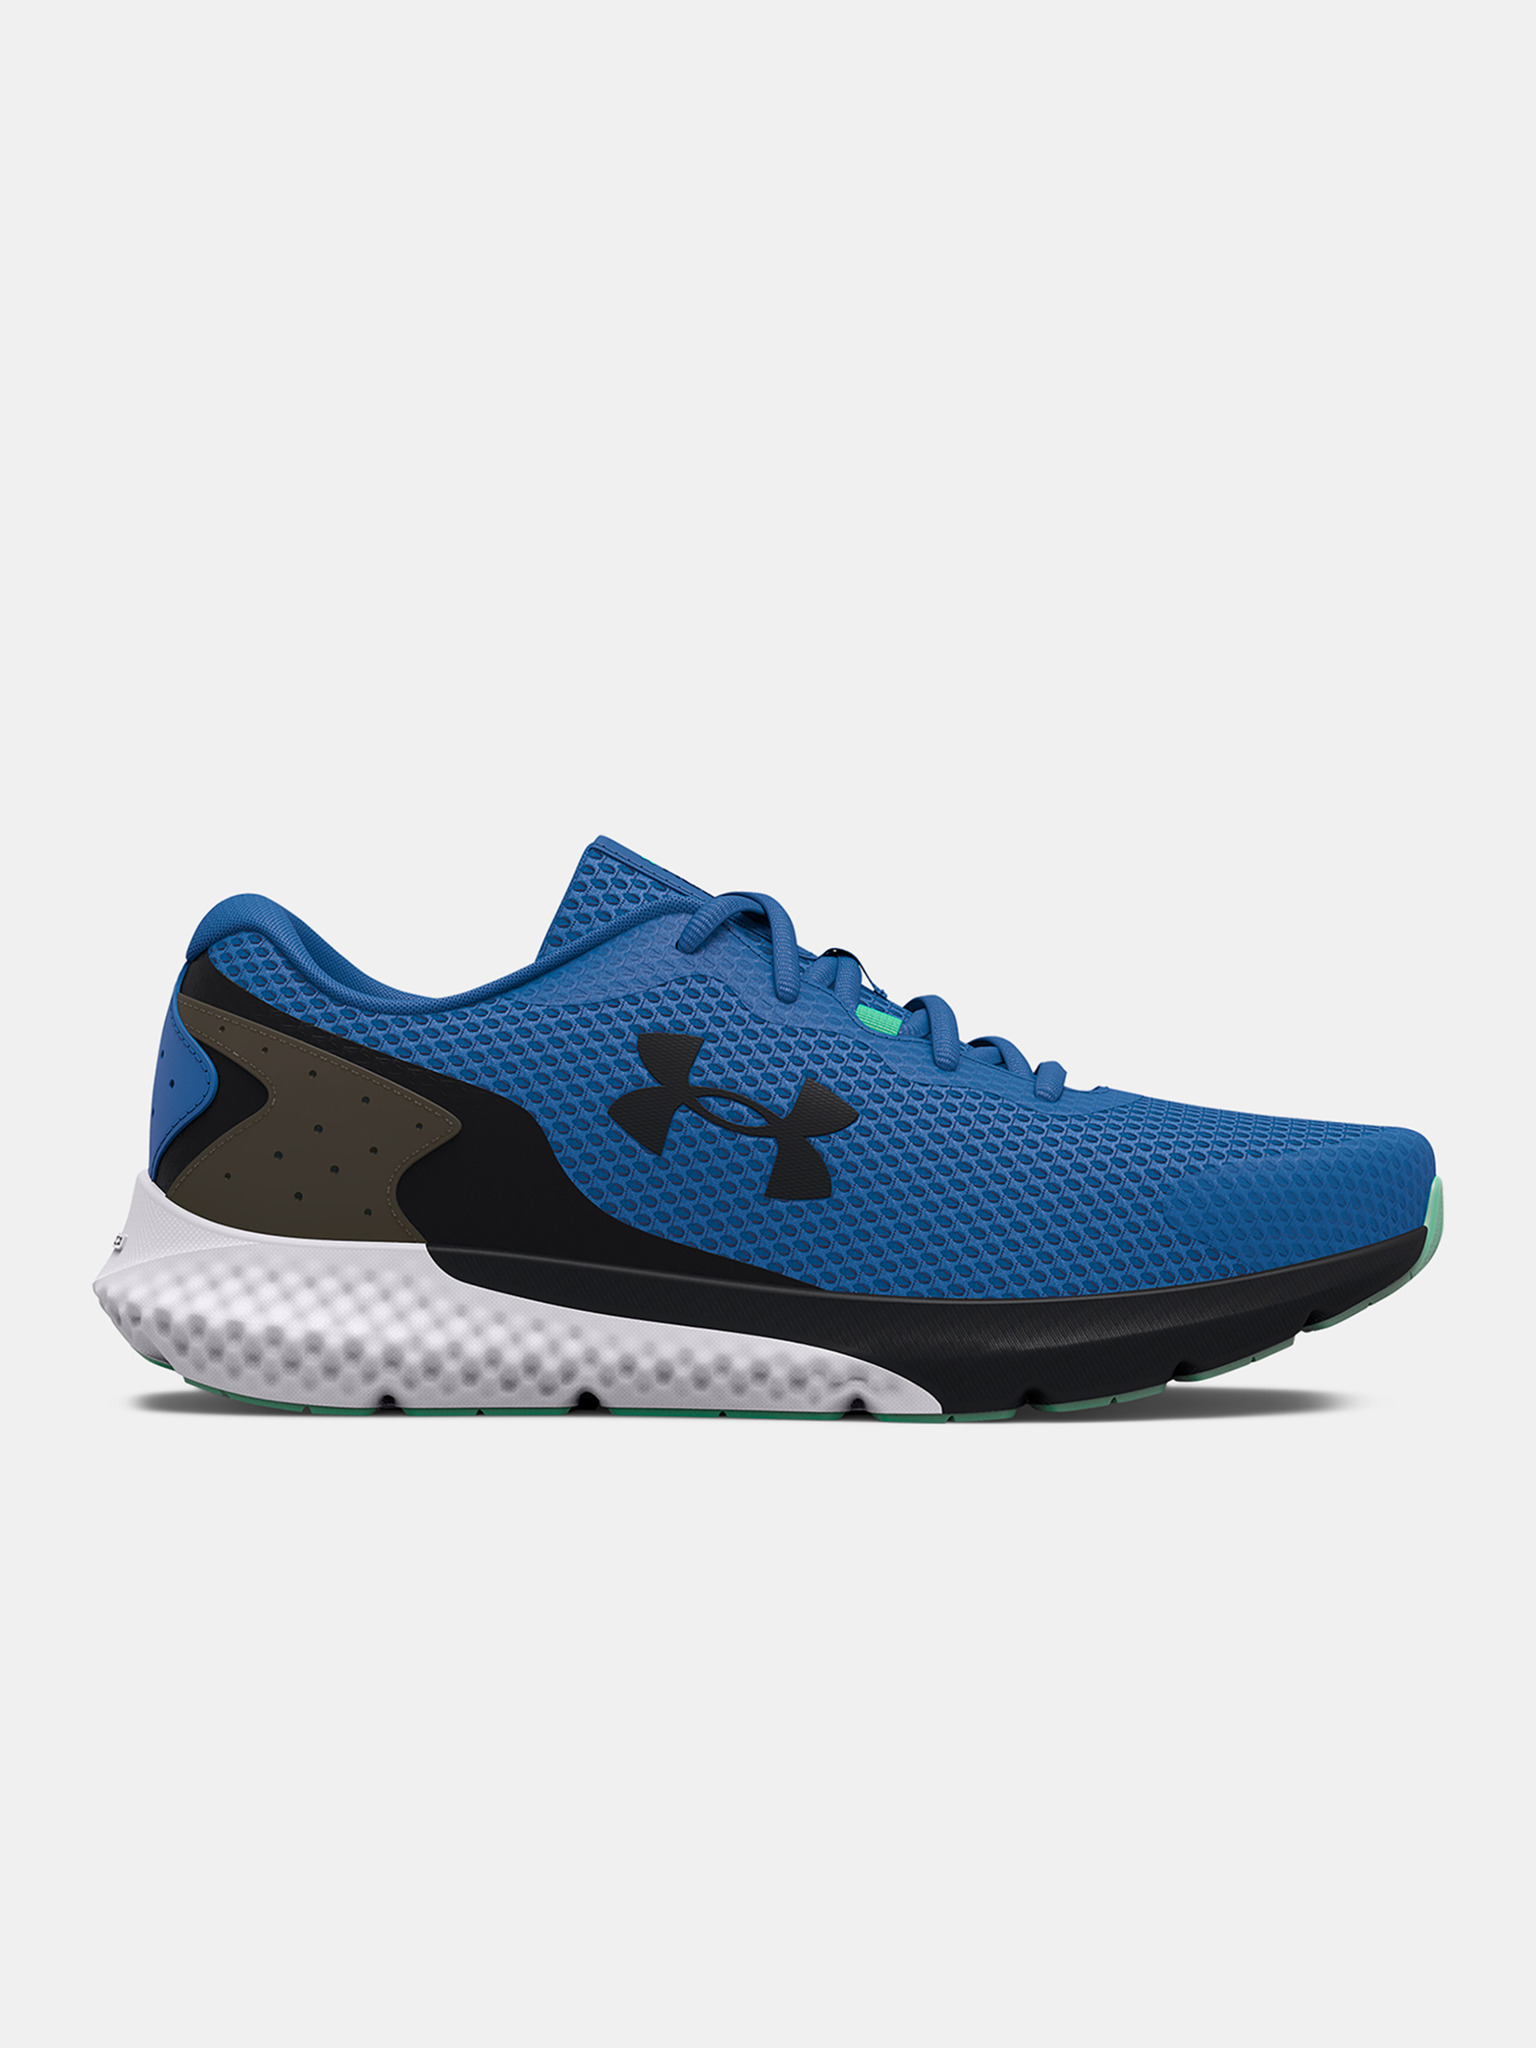 Under Armour Charged Rogue 3 Running Shoes - 3024877